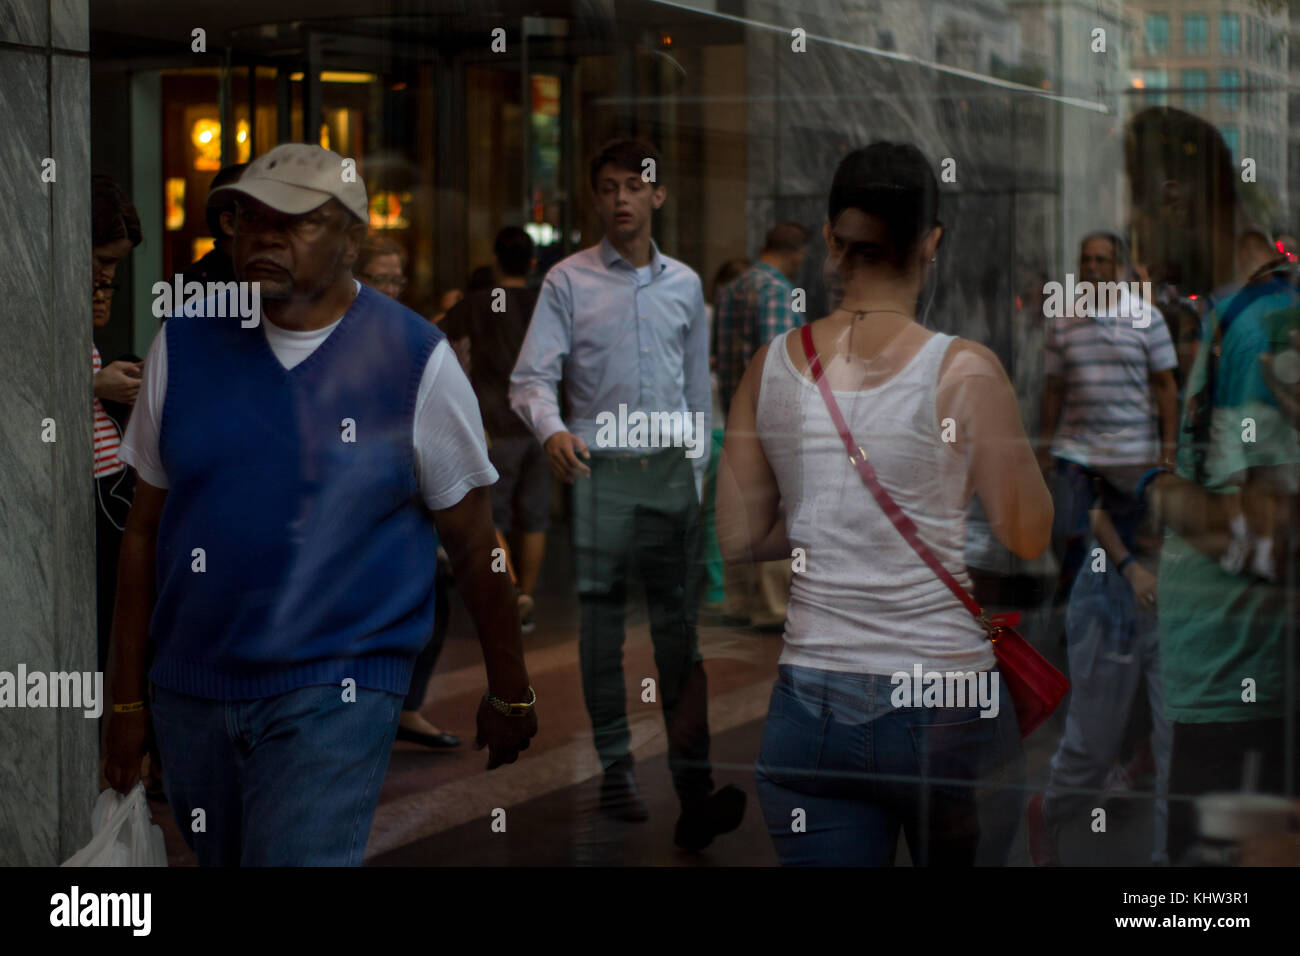 Window collage of people in downtown Chicago. Stock Photo